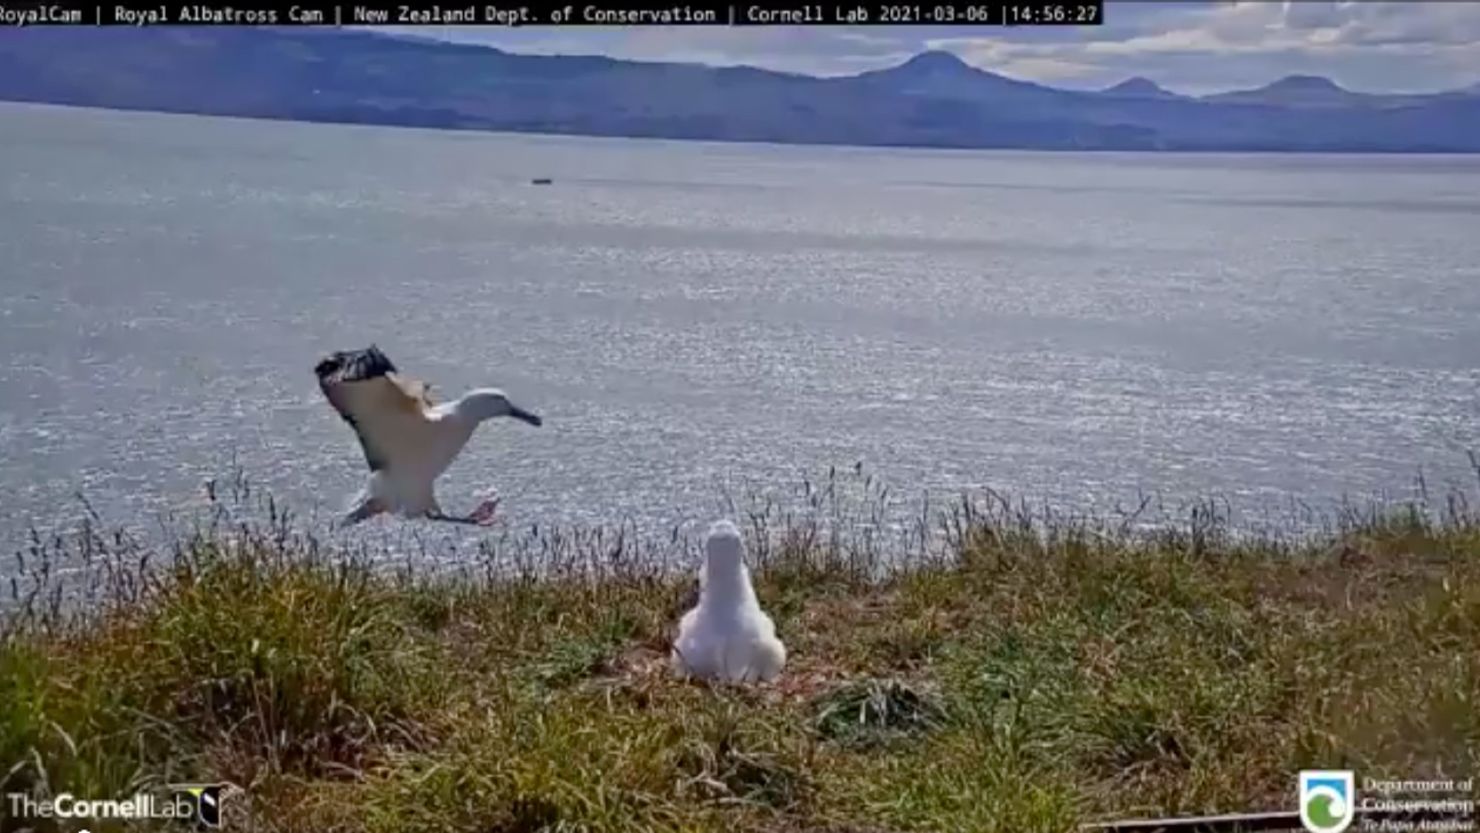 This adult albatross went viral after face-planting upon landing during a live stream.